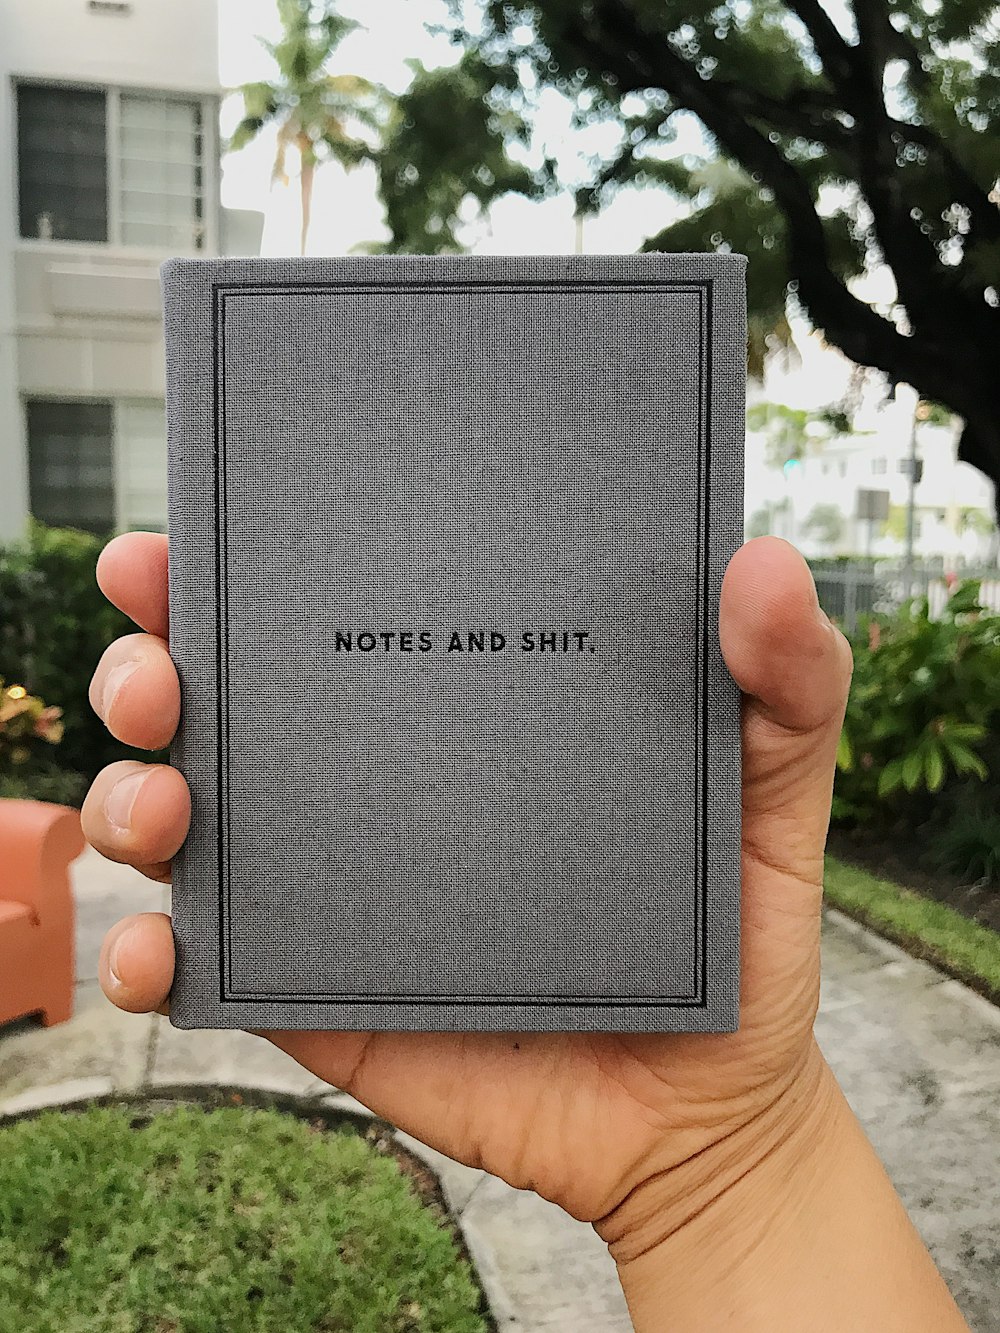 Notes and Shit book